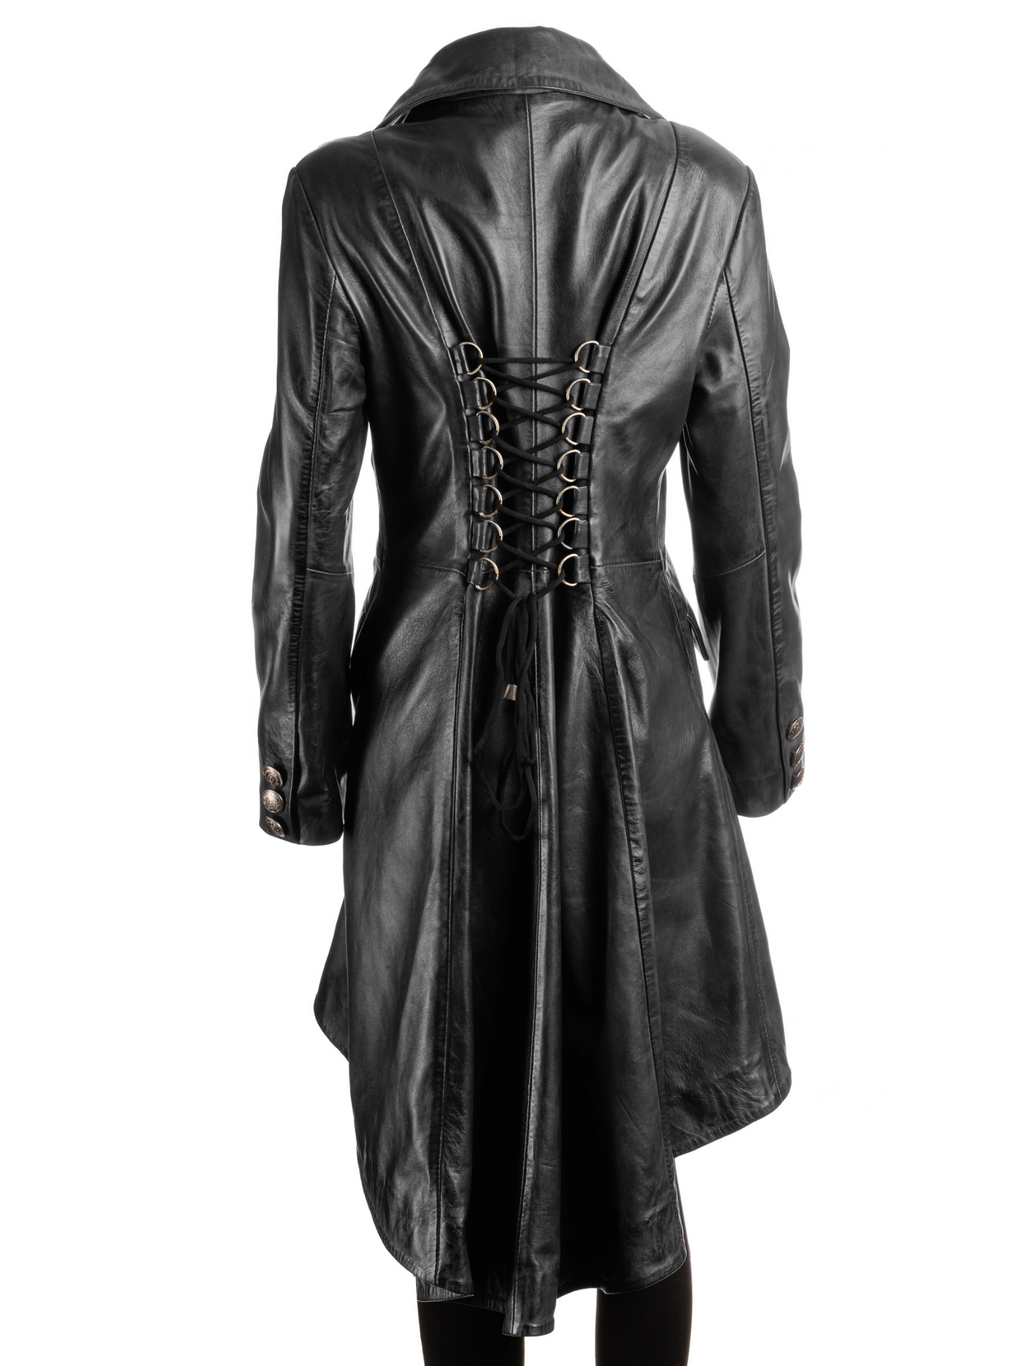 Ladies Black Leather Dip Hem Double Breasted Edwardian Military Style 3/4 Coat: Alessia